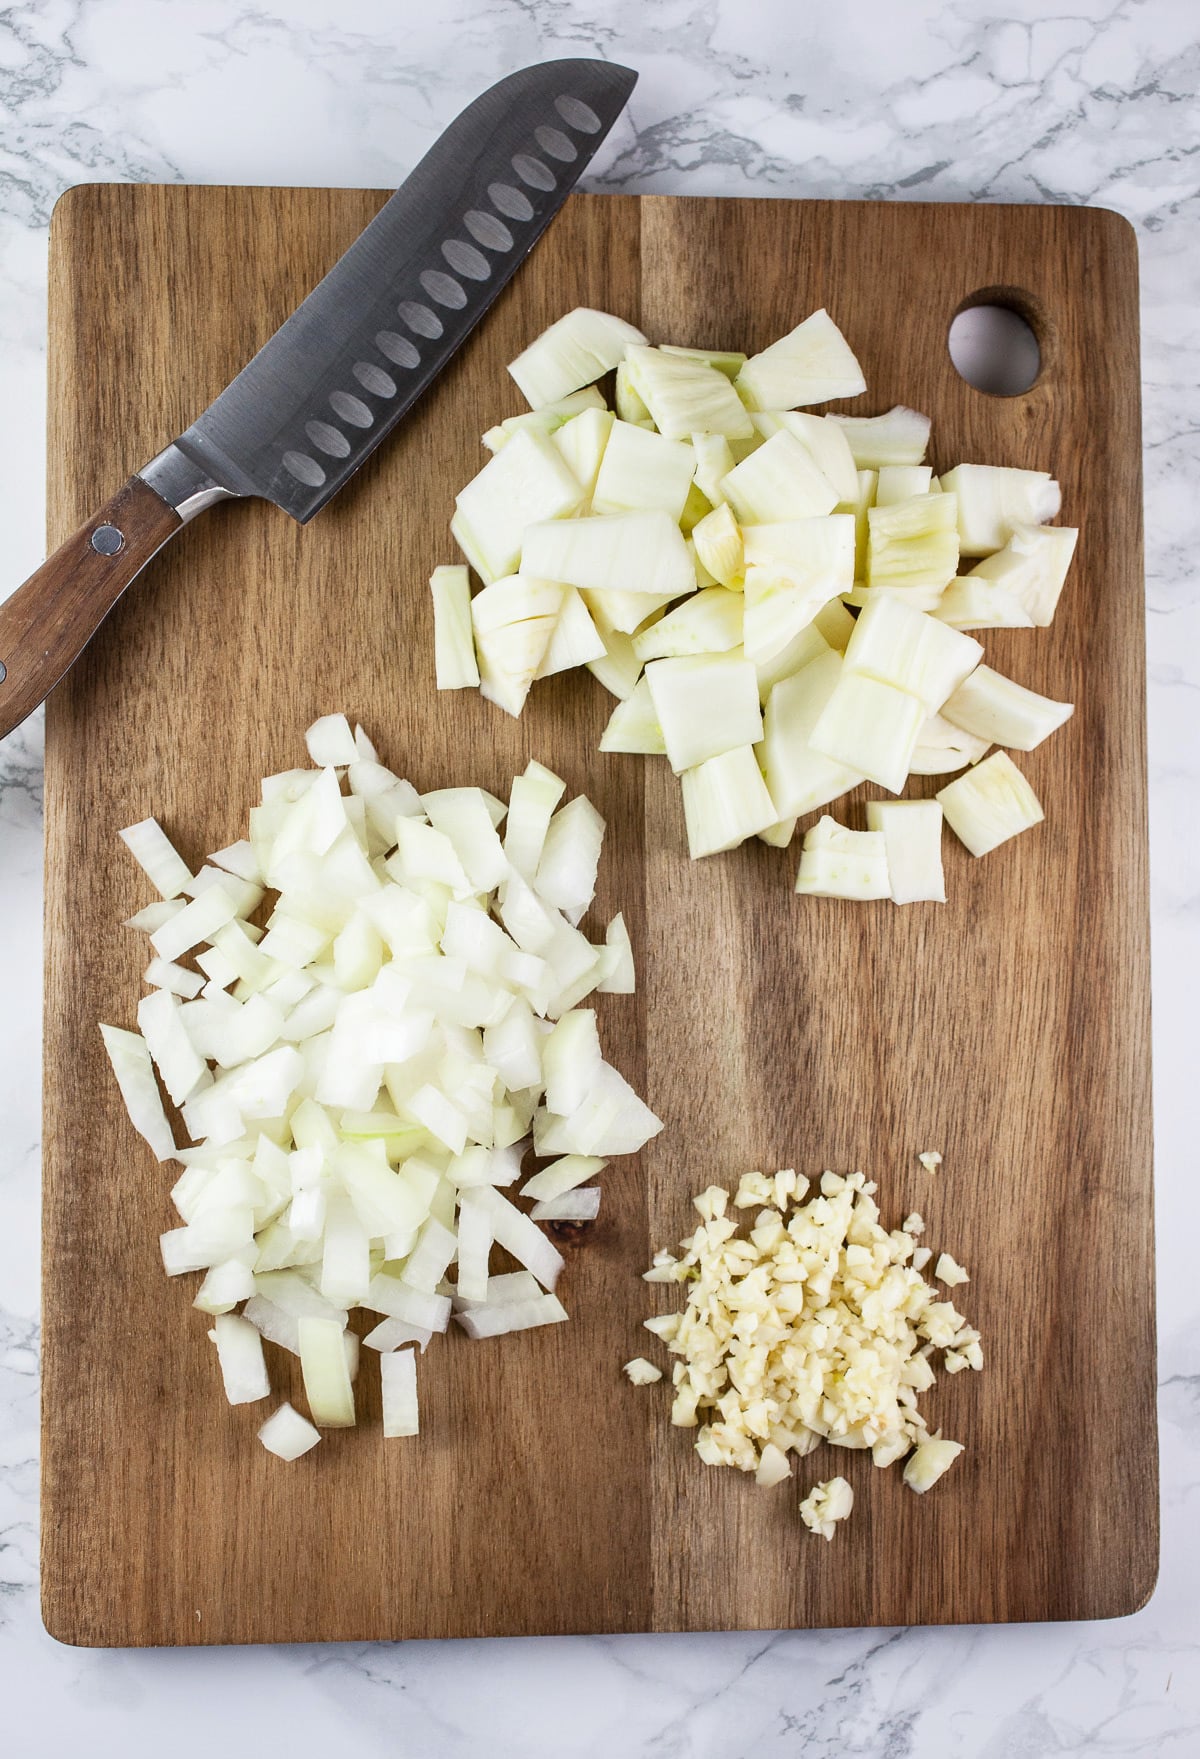 Minced garlic, onions, and fennel on wooden cutting board with knife.